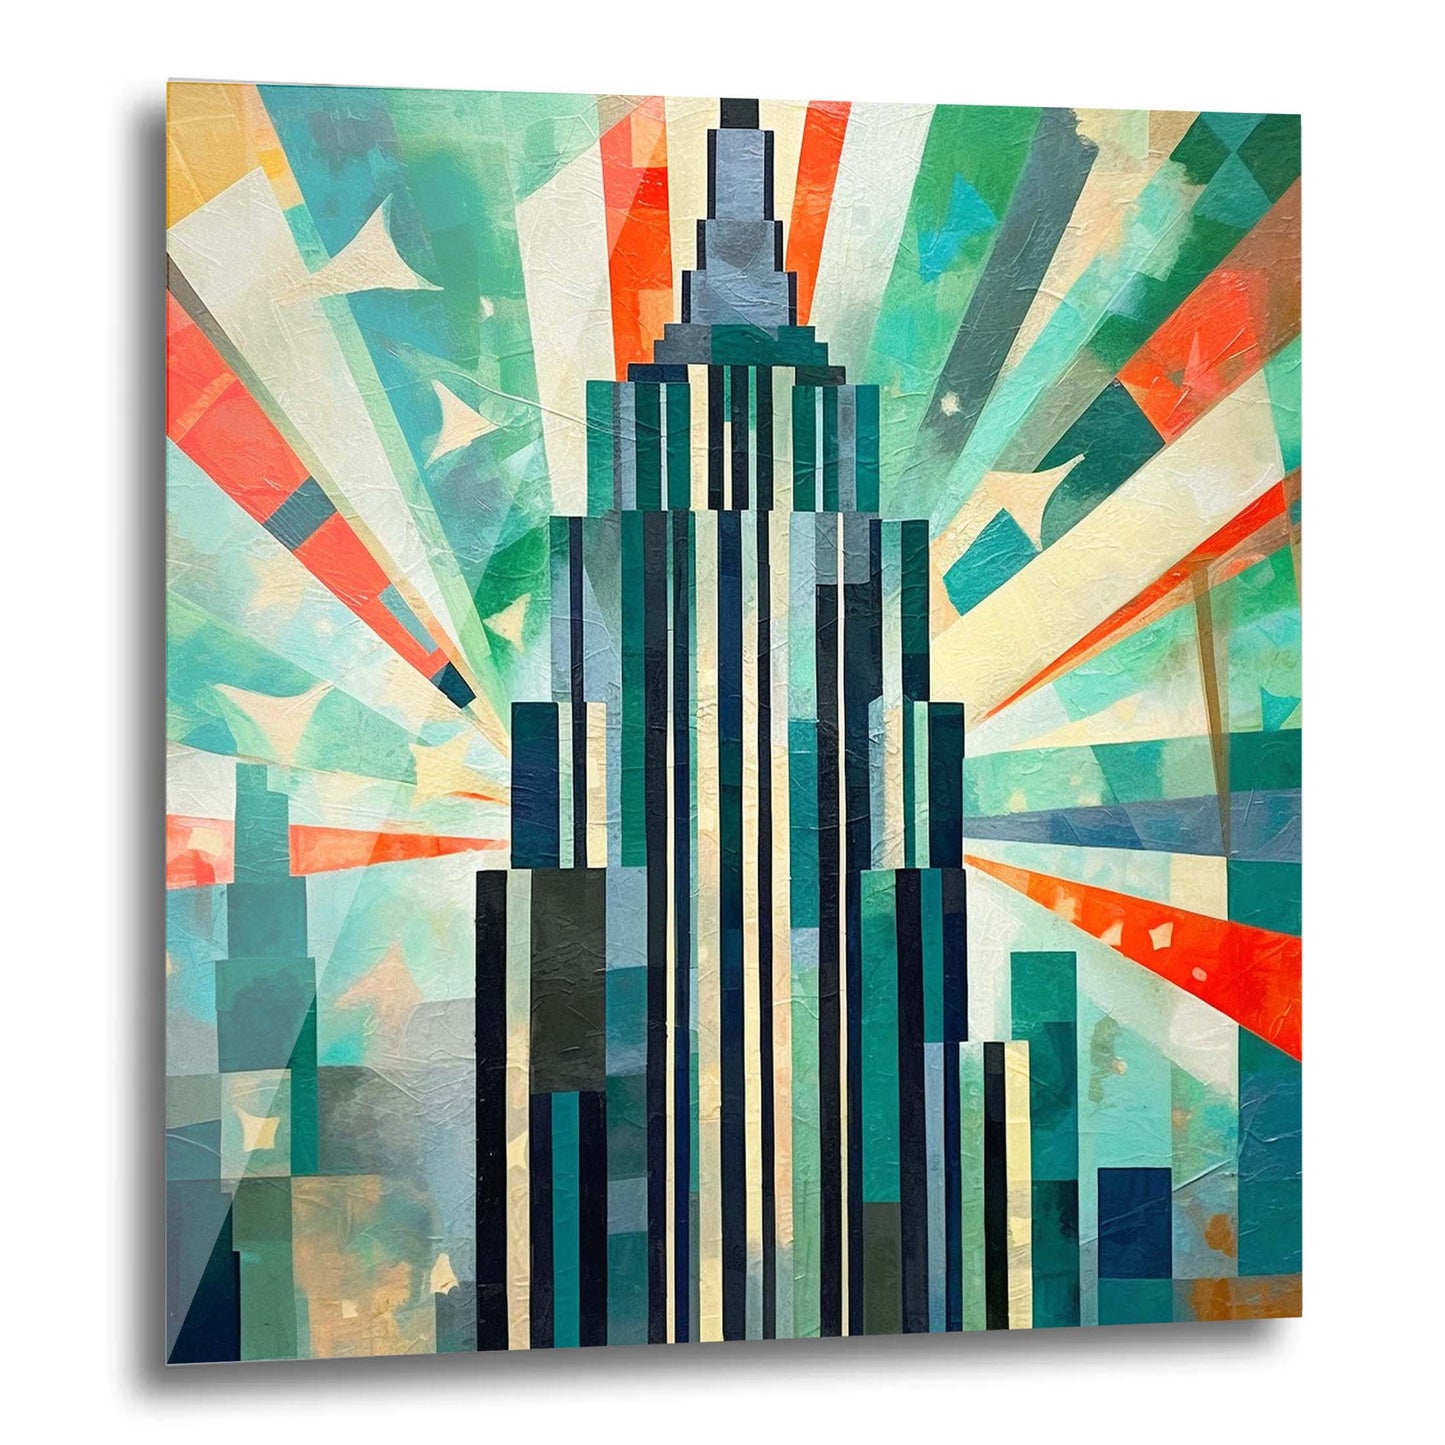 New York Empire State Building - mural in the style of expressionism